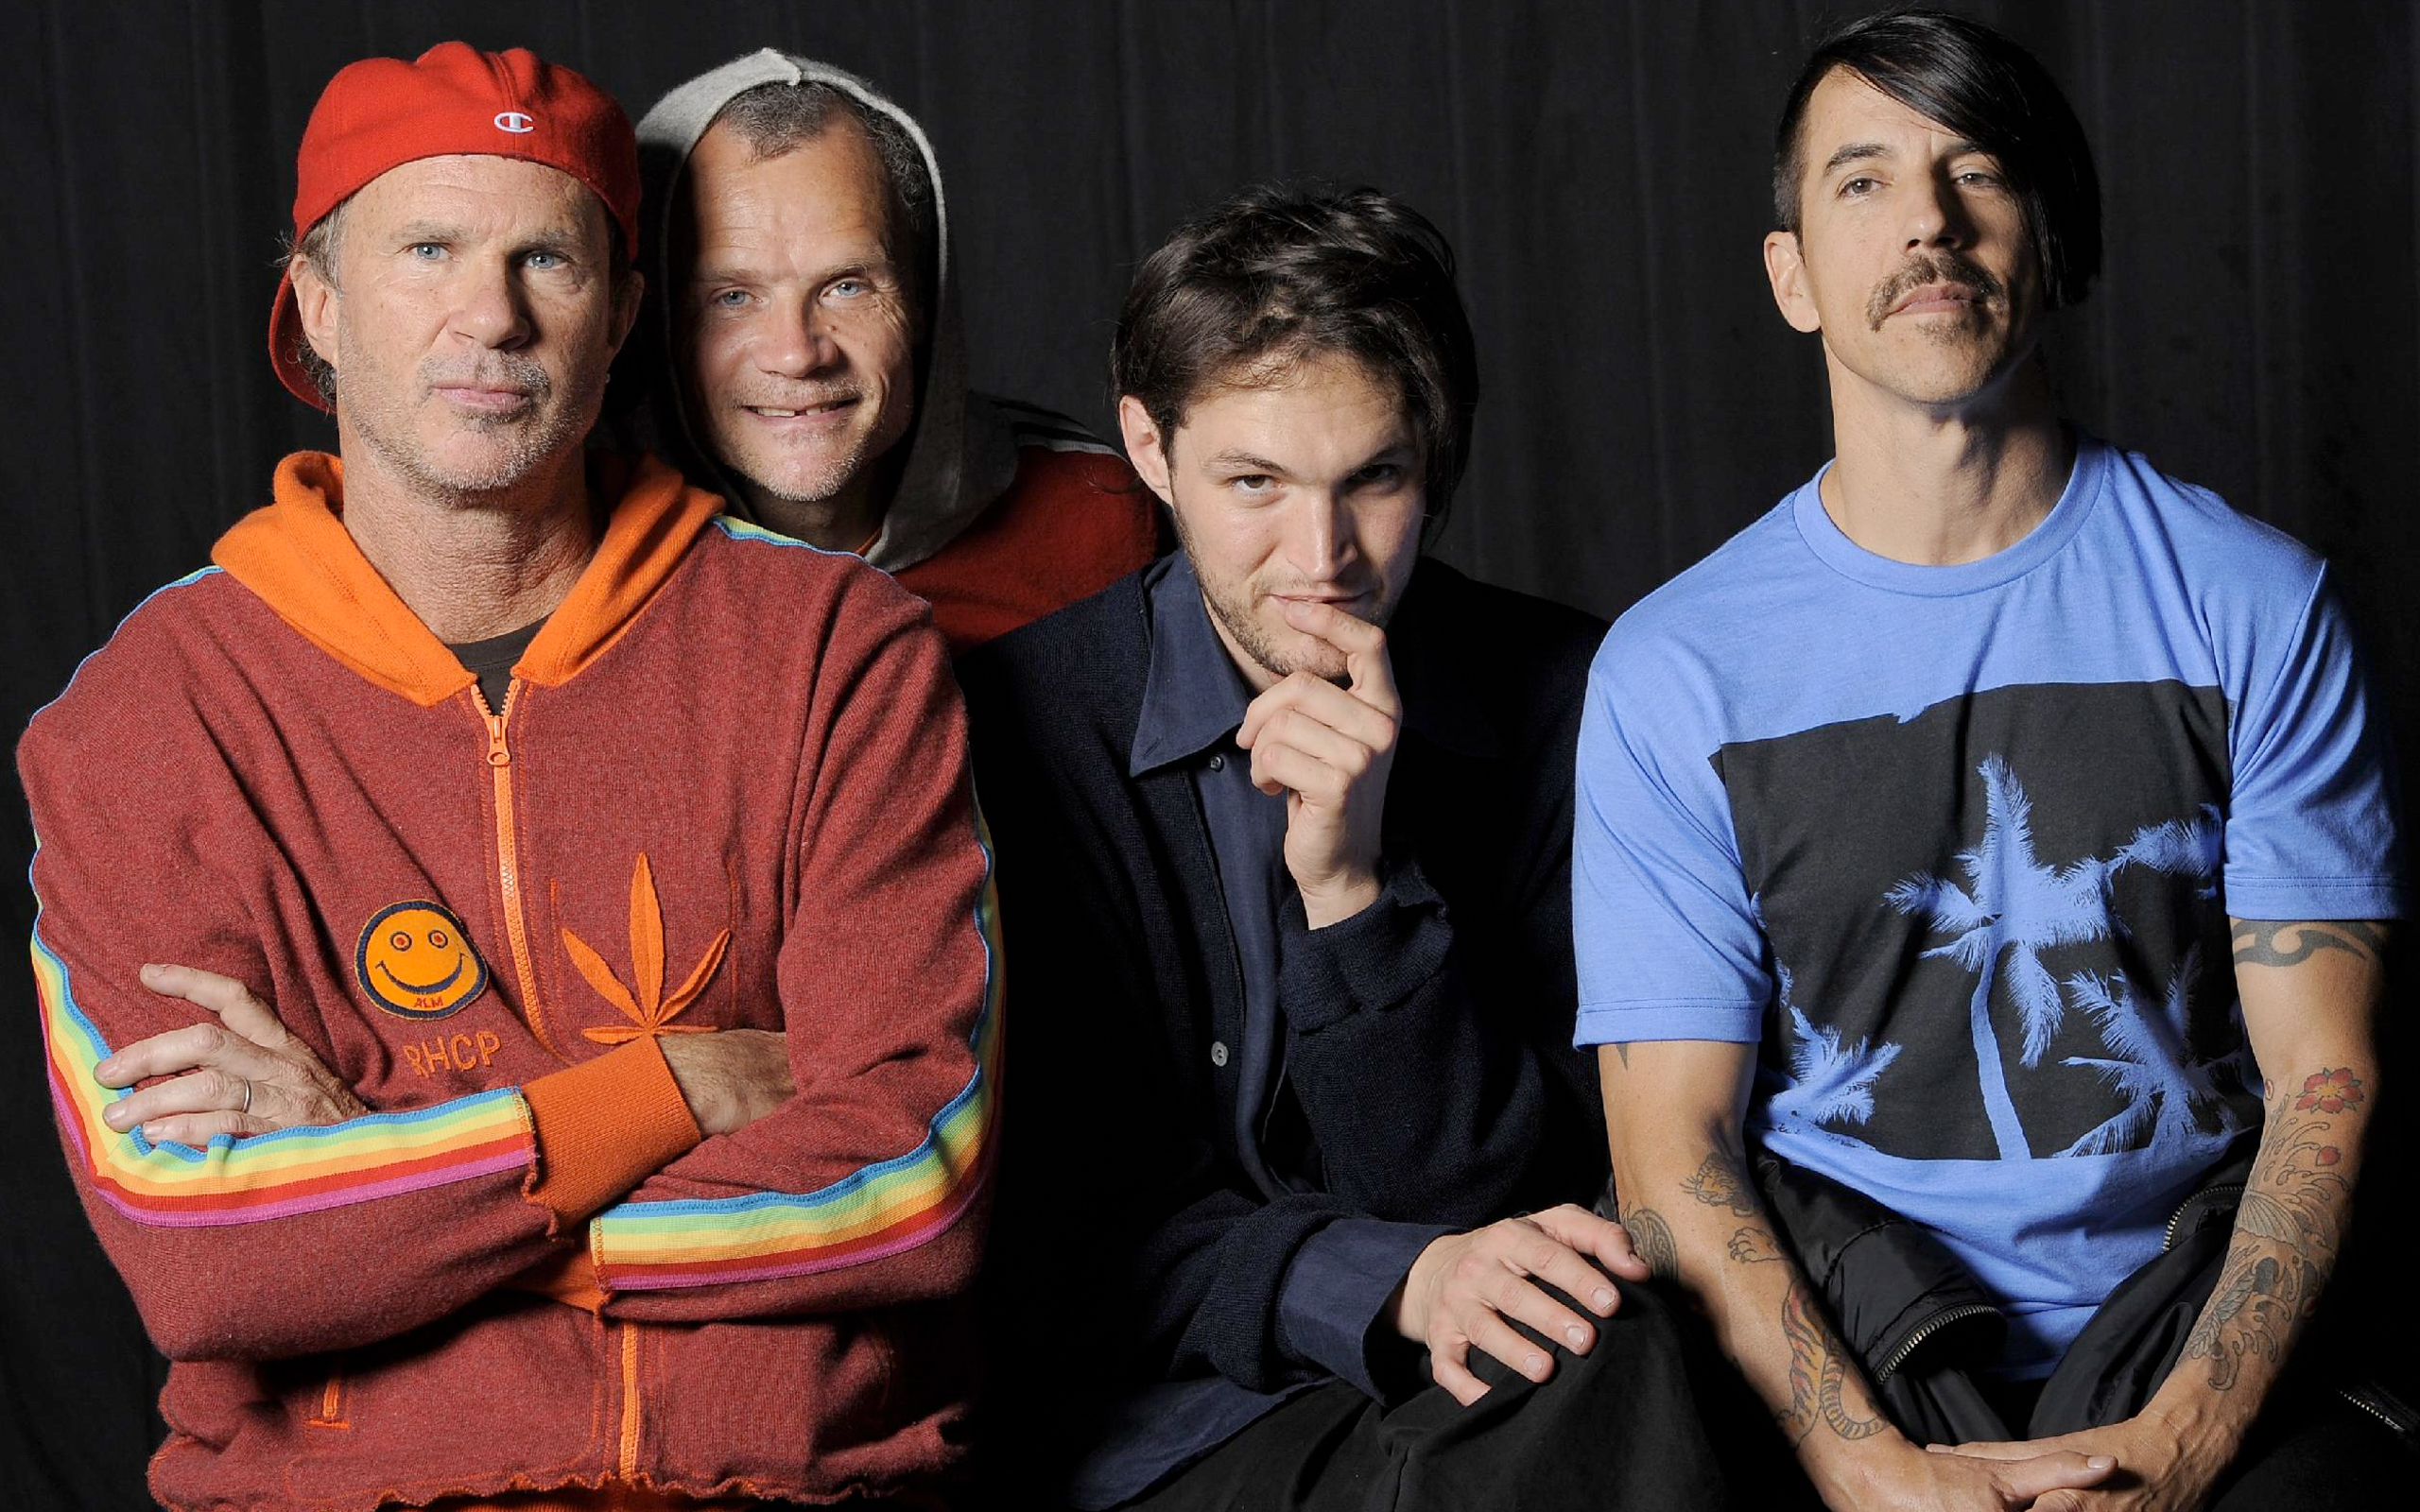 This is actually a post or even graphic around the Red Hot Chili Peppers об...